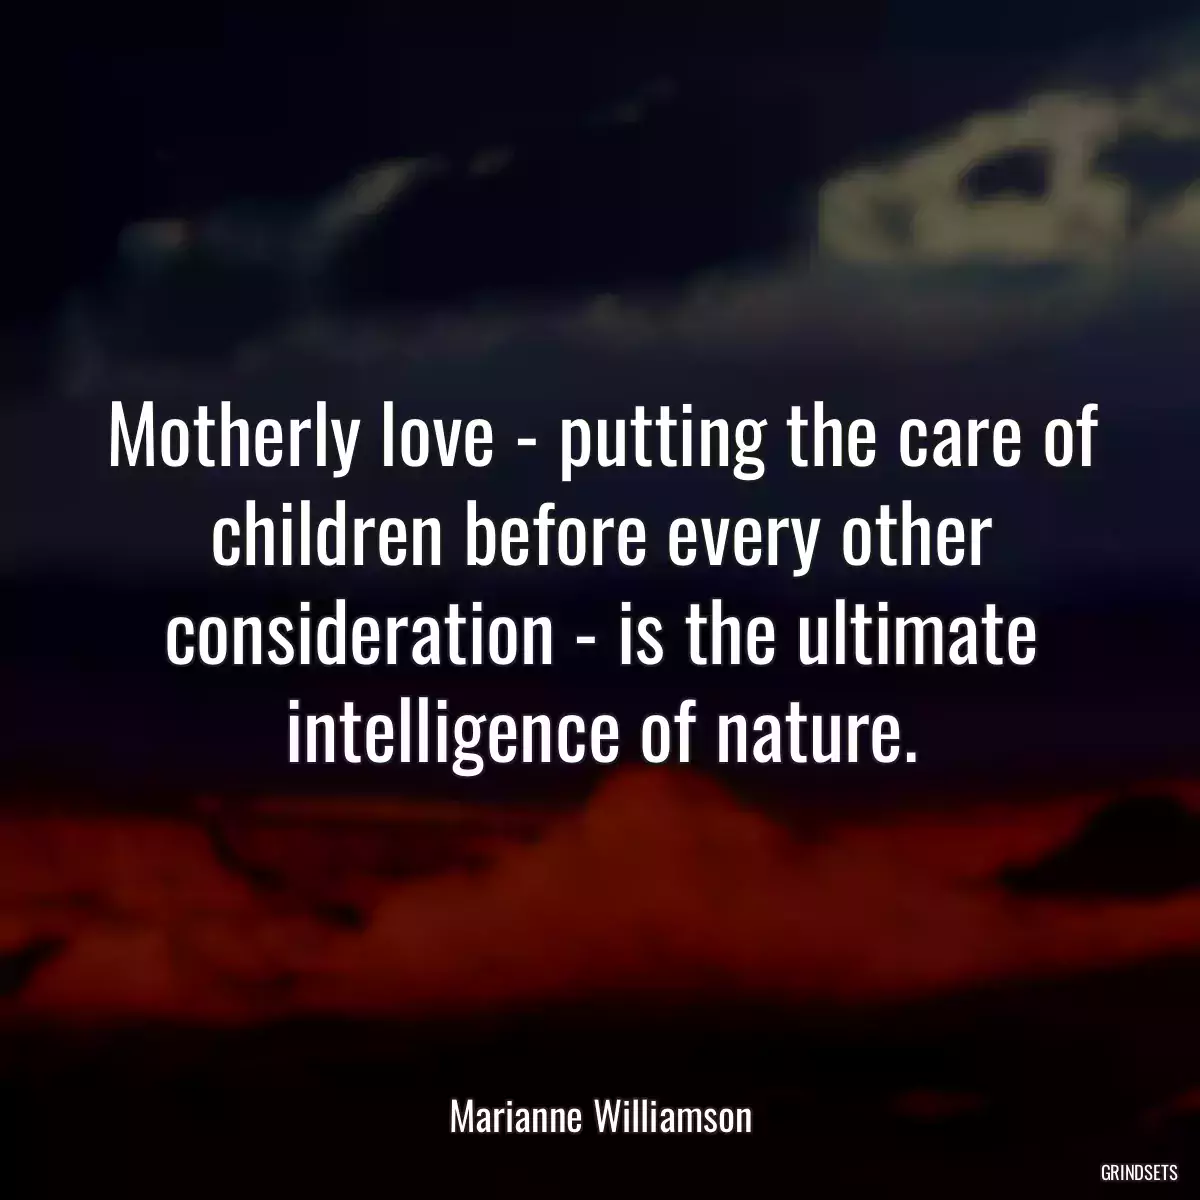 Motherly love - putting the care of children before every other consideration - is the ultimate intelligence of nature.